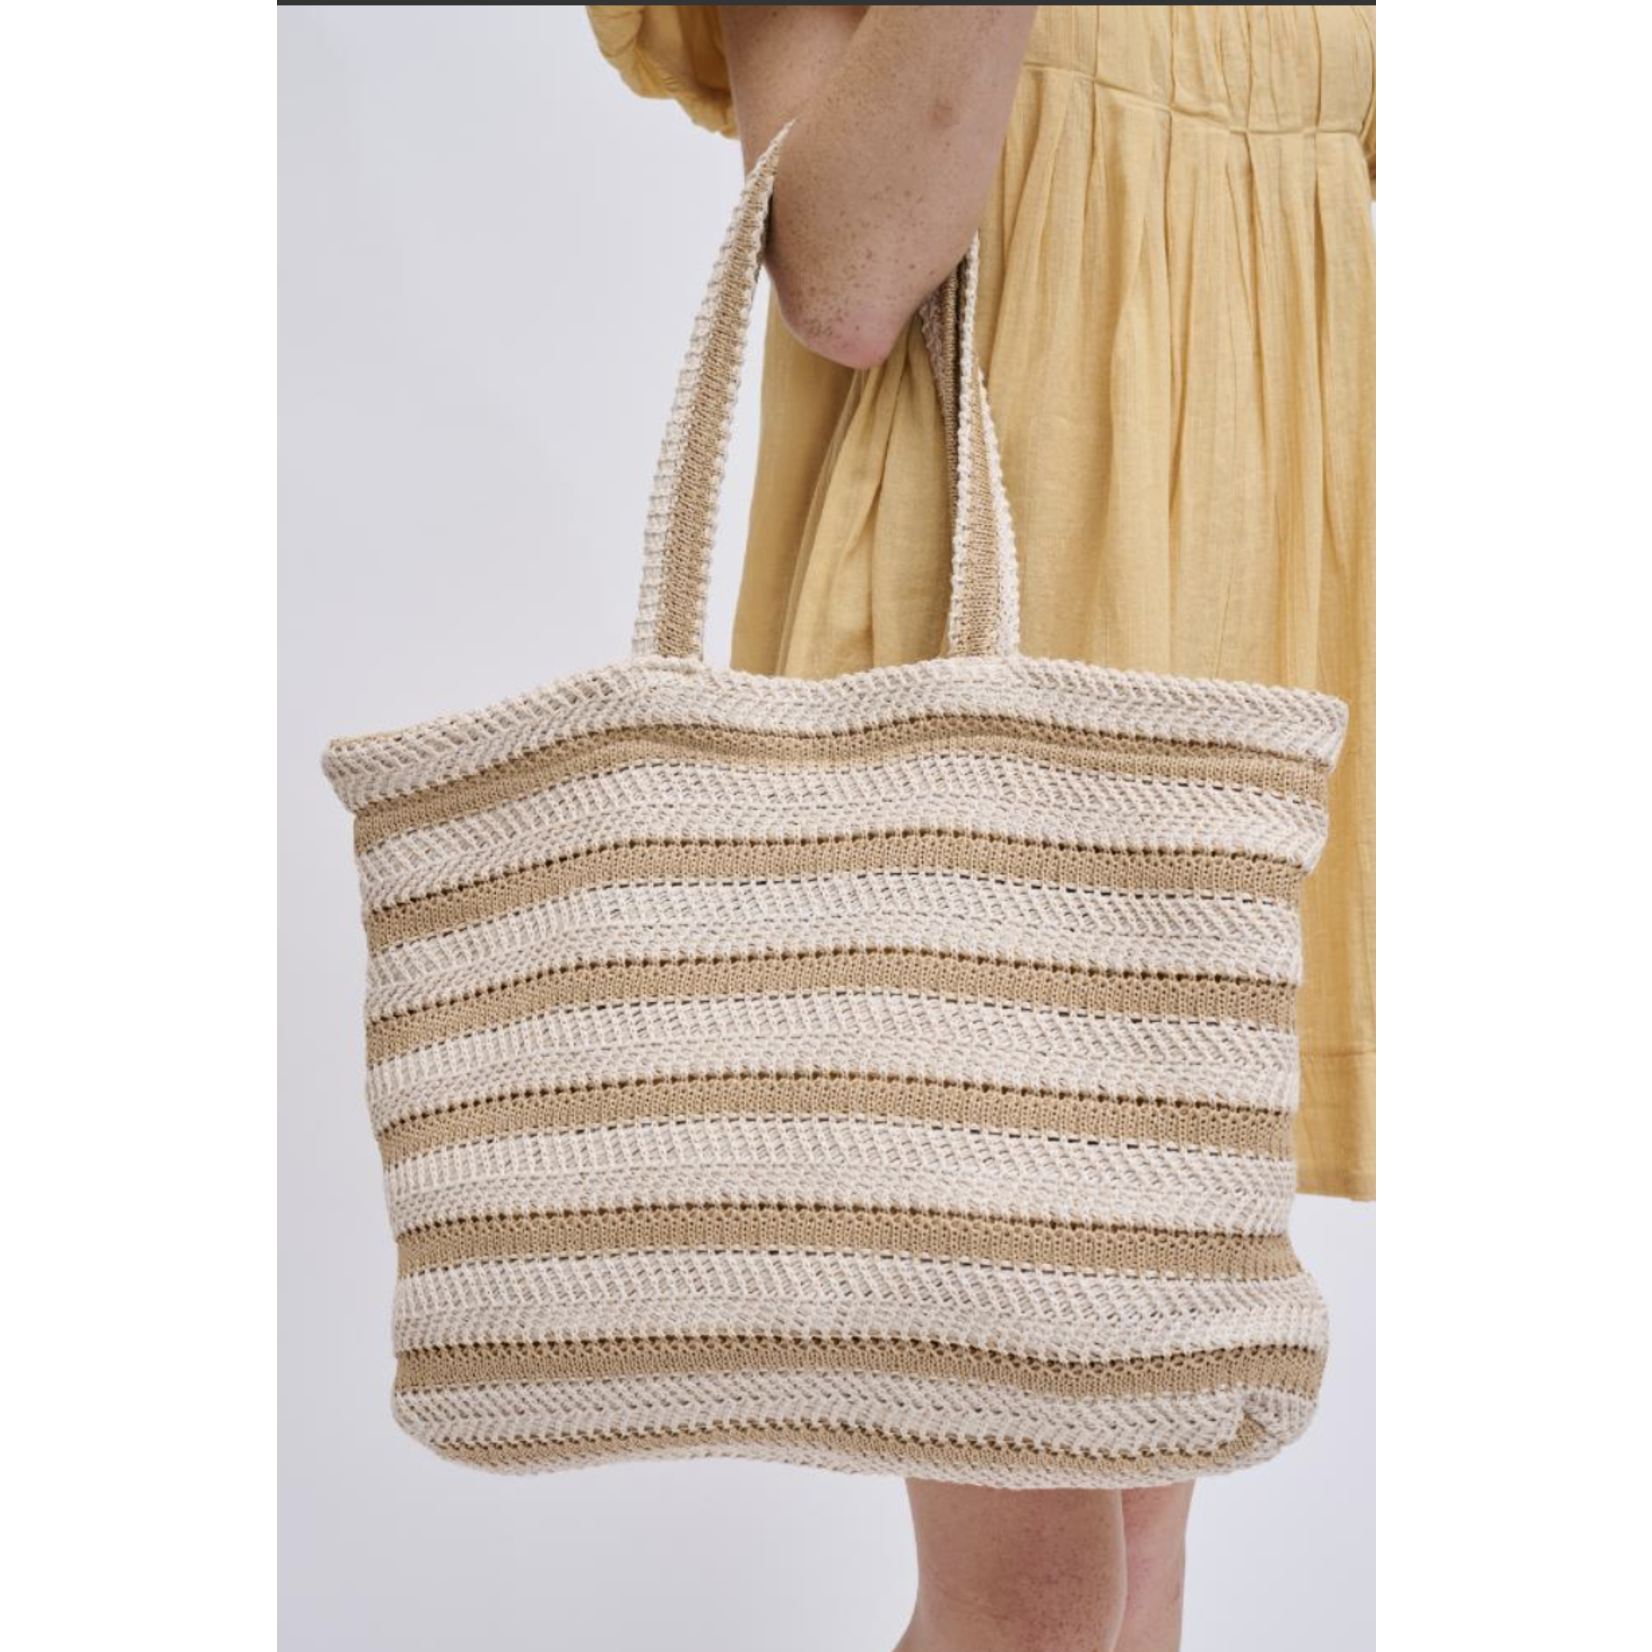 Urban Expressions Ophelia Tote-Ivory/Natural